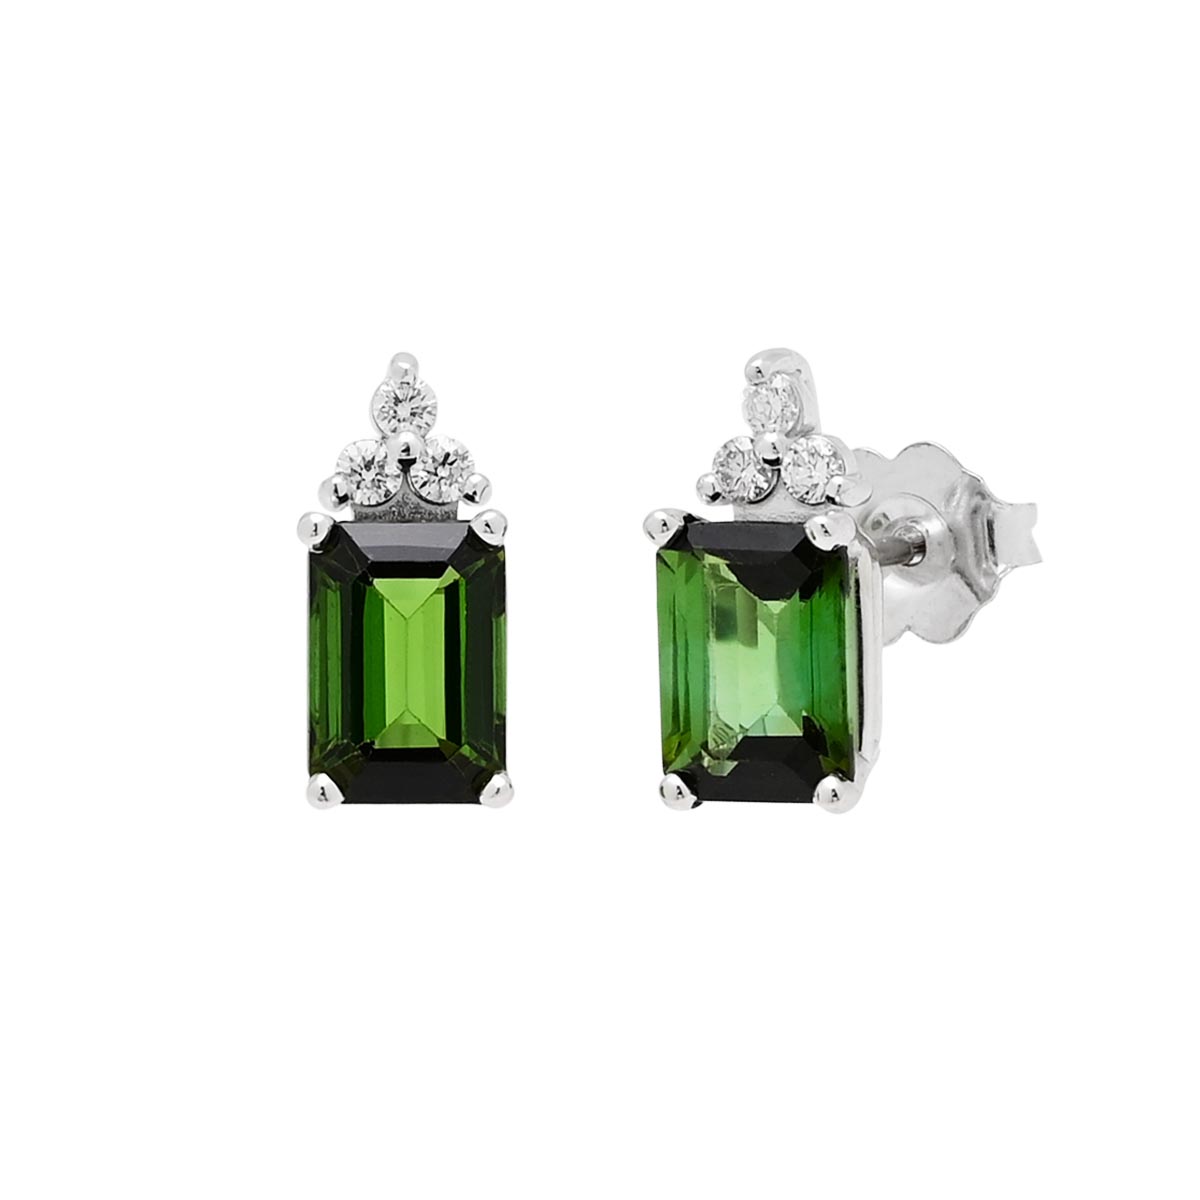 Maine Green Tourmaline Emerald Cut Stud Earrings in 14kt White Gold with Diamonds (1/10ct tw)